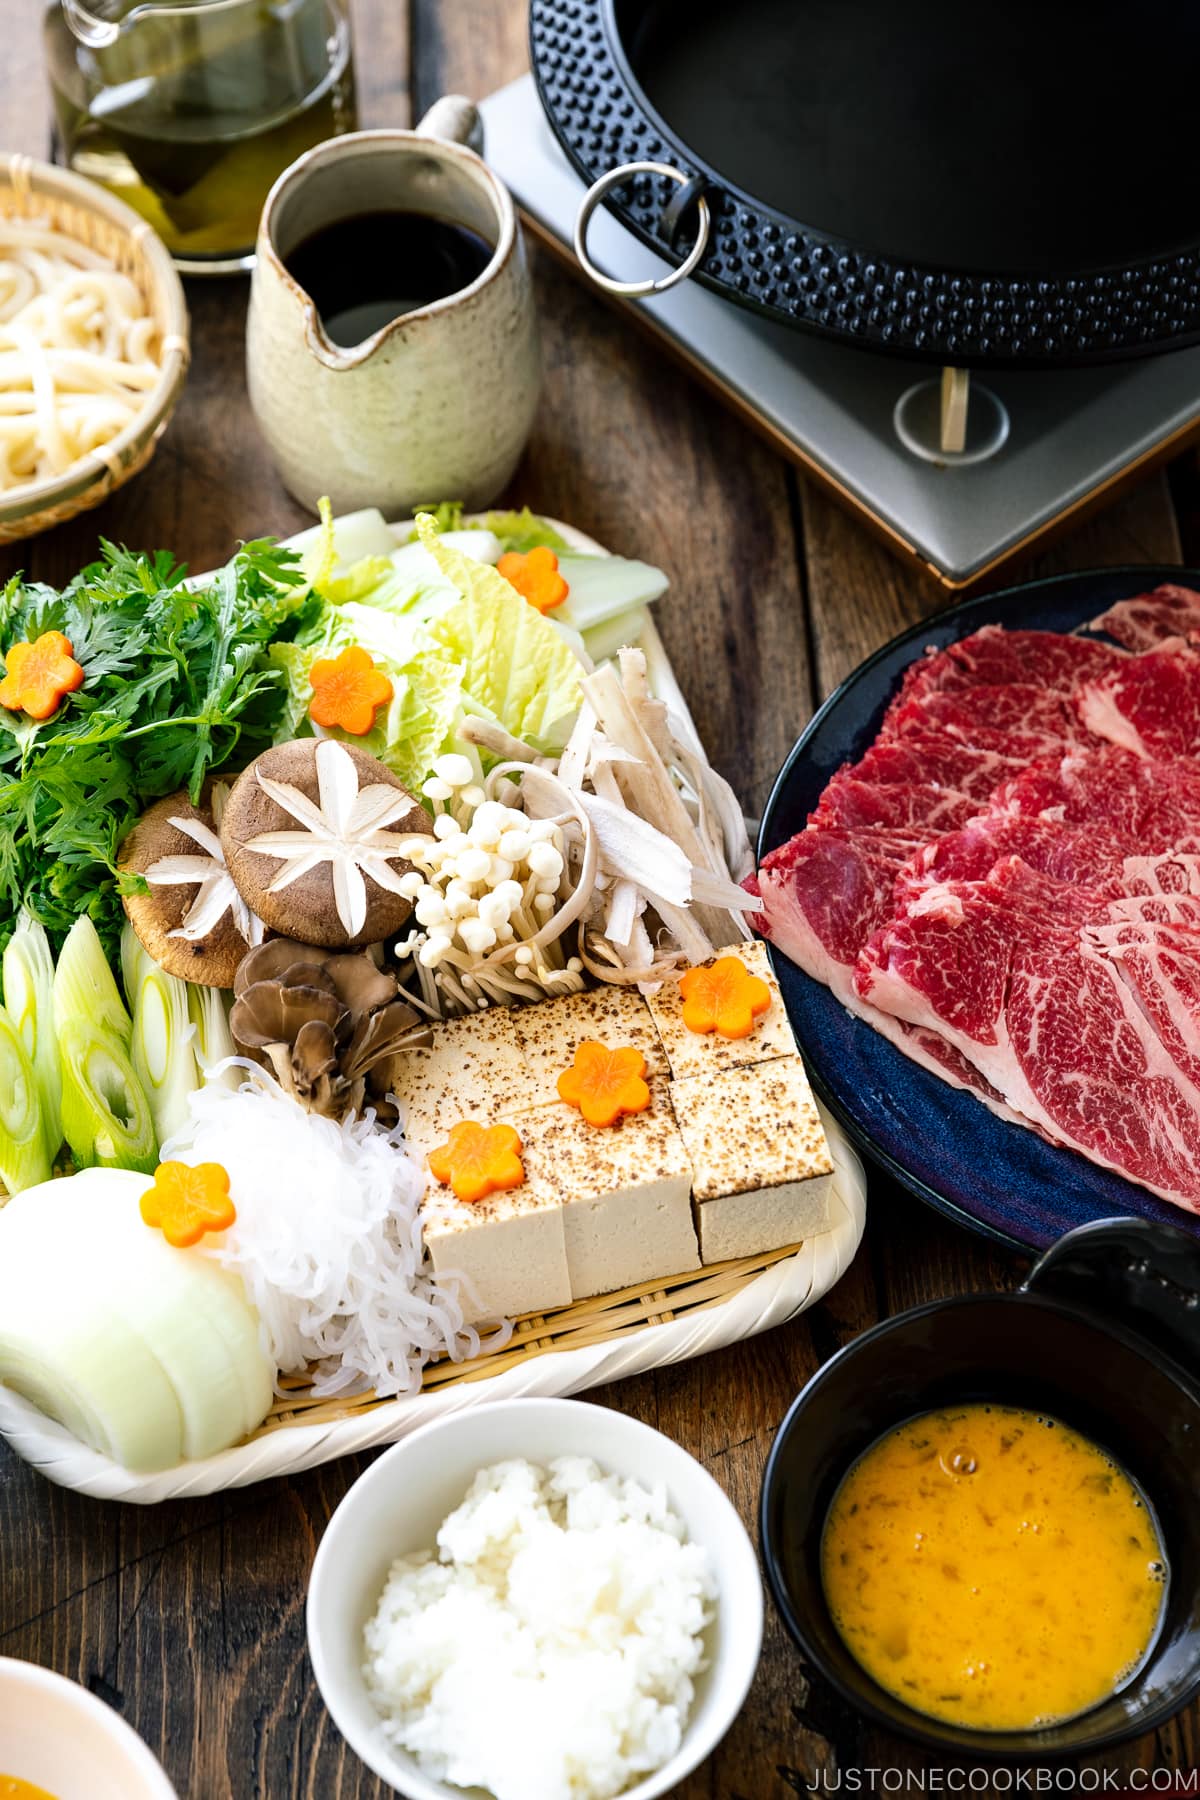 Japanese round cast iron pan, a plate of Japanese beef slices, and a bamboo basket of various vegetables, tofu, and mushrooms.a Japanese hot pot dish where marbled beef, tofu, and vegetables are simmered in sweetened soy sauce broth.